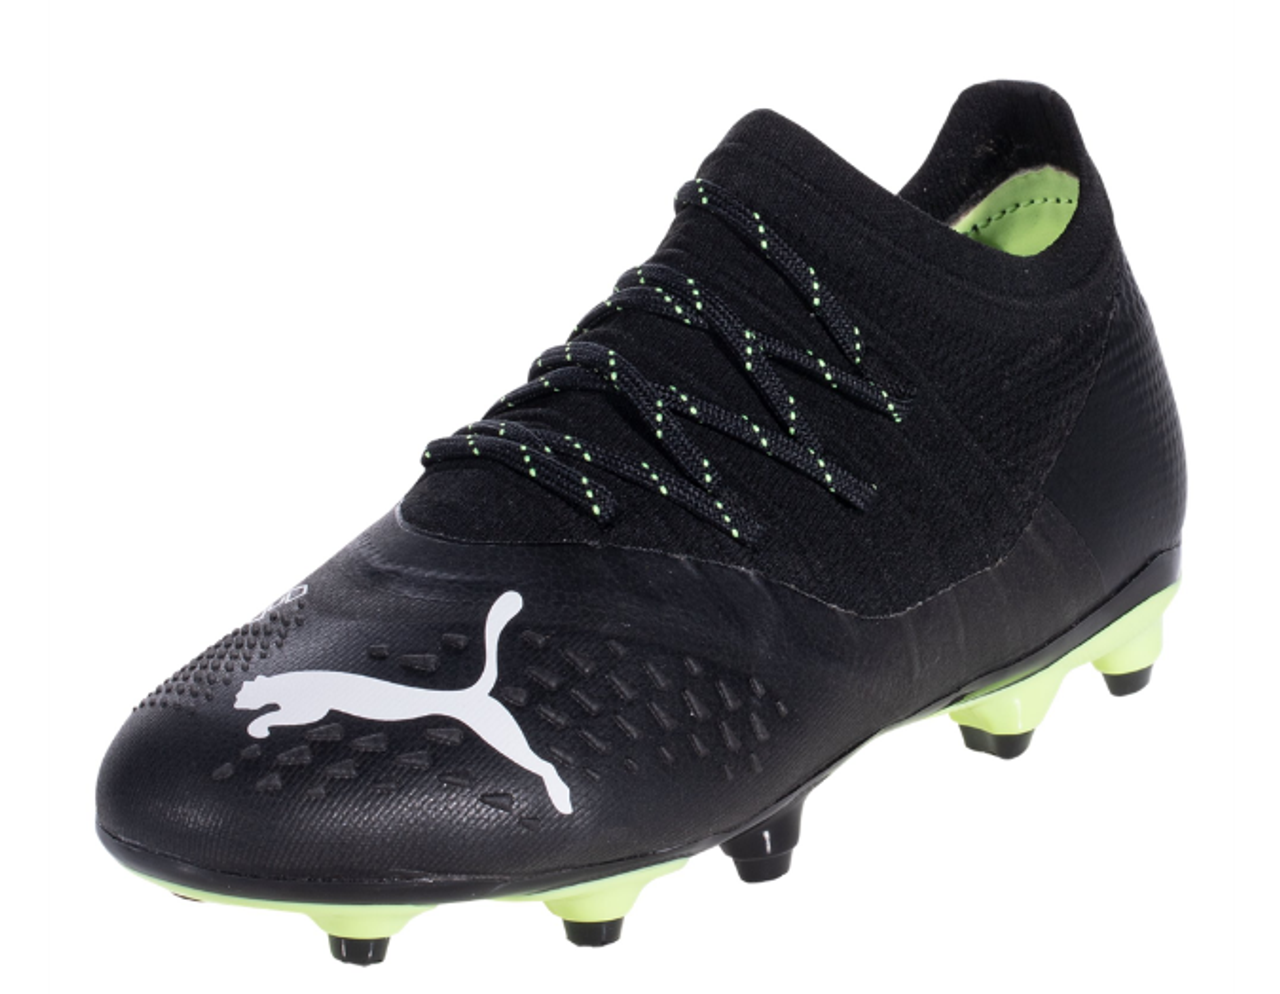 Awesome Football Shoes Puma Youth Future Z 2.3 FG/AG- Black/White/Fizzy  Light- (061022) - ohp soccer